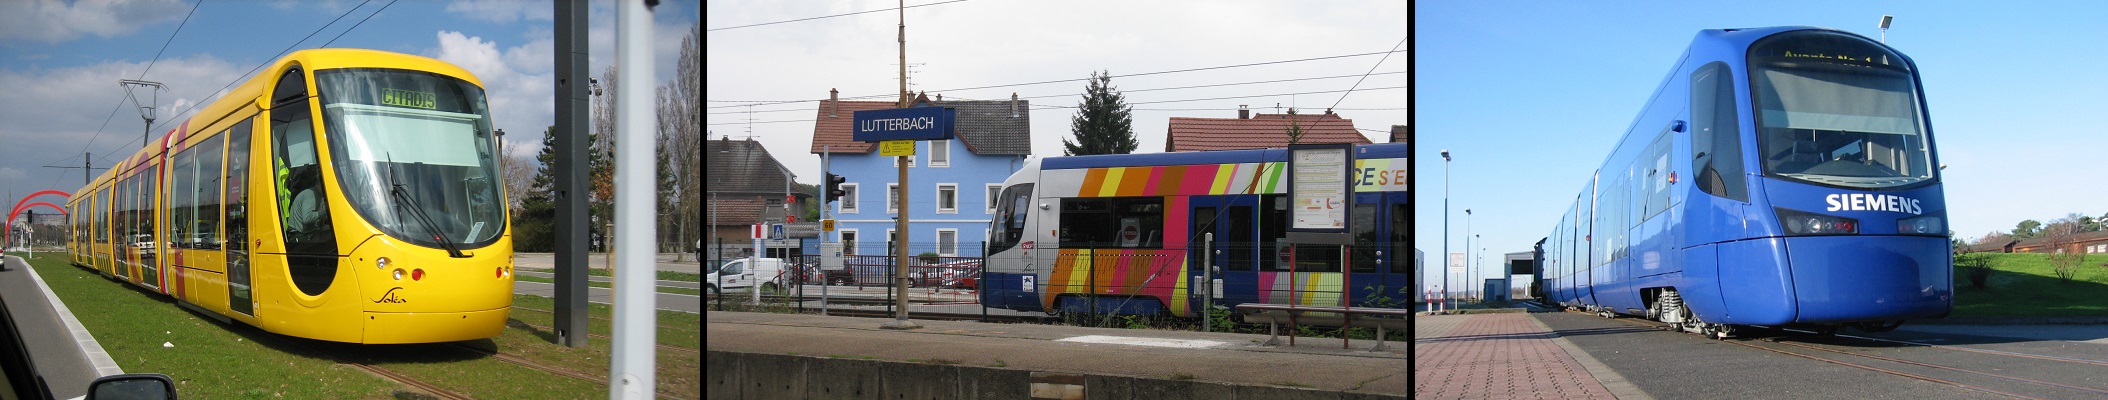 Tram-trains - Thur's valley, Mulhouse and Germany